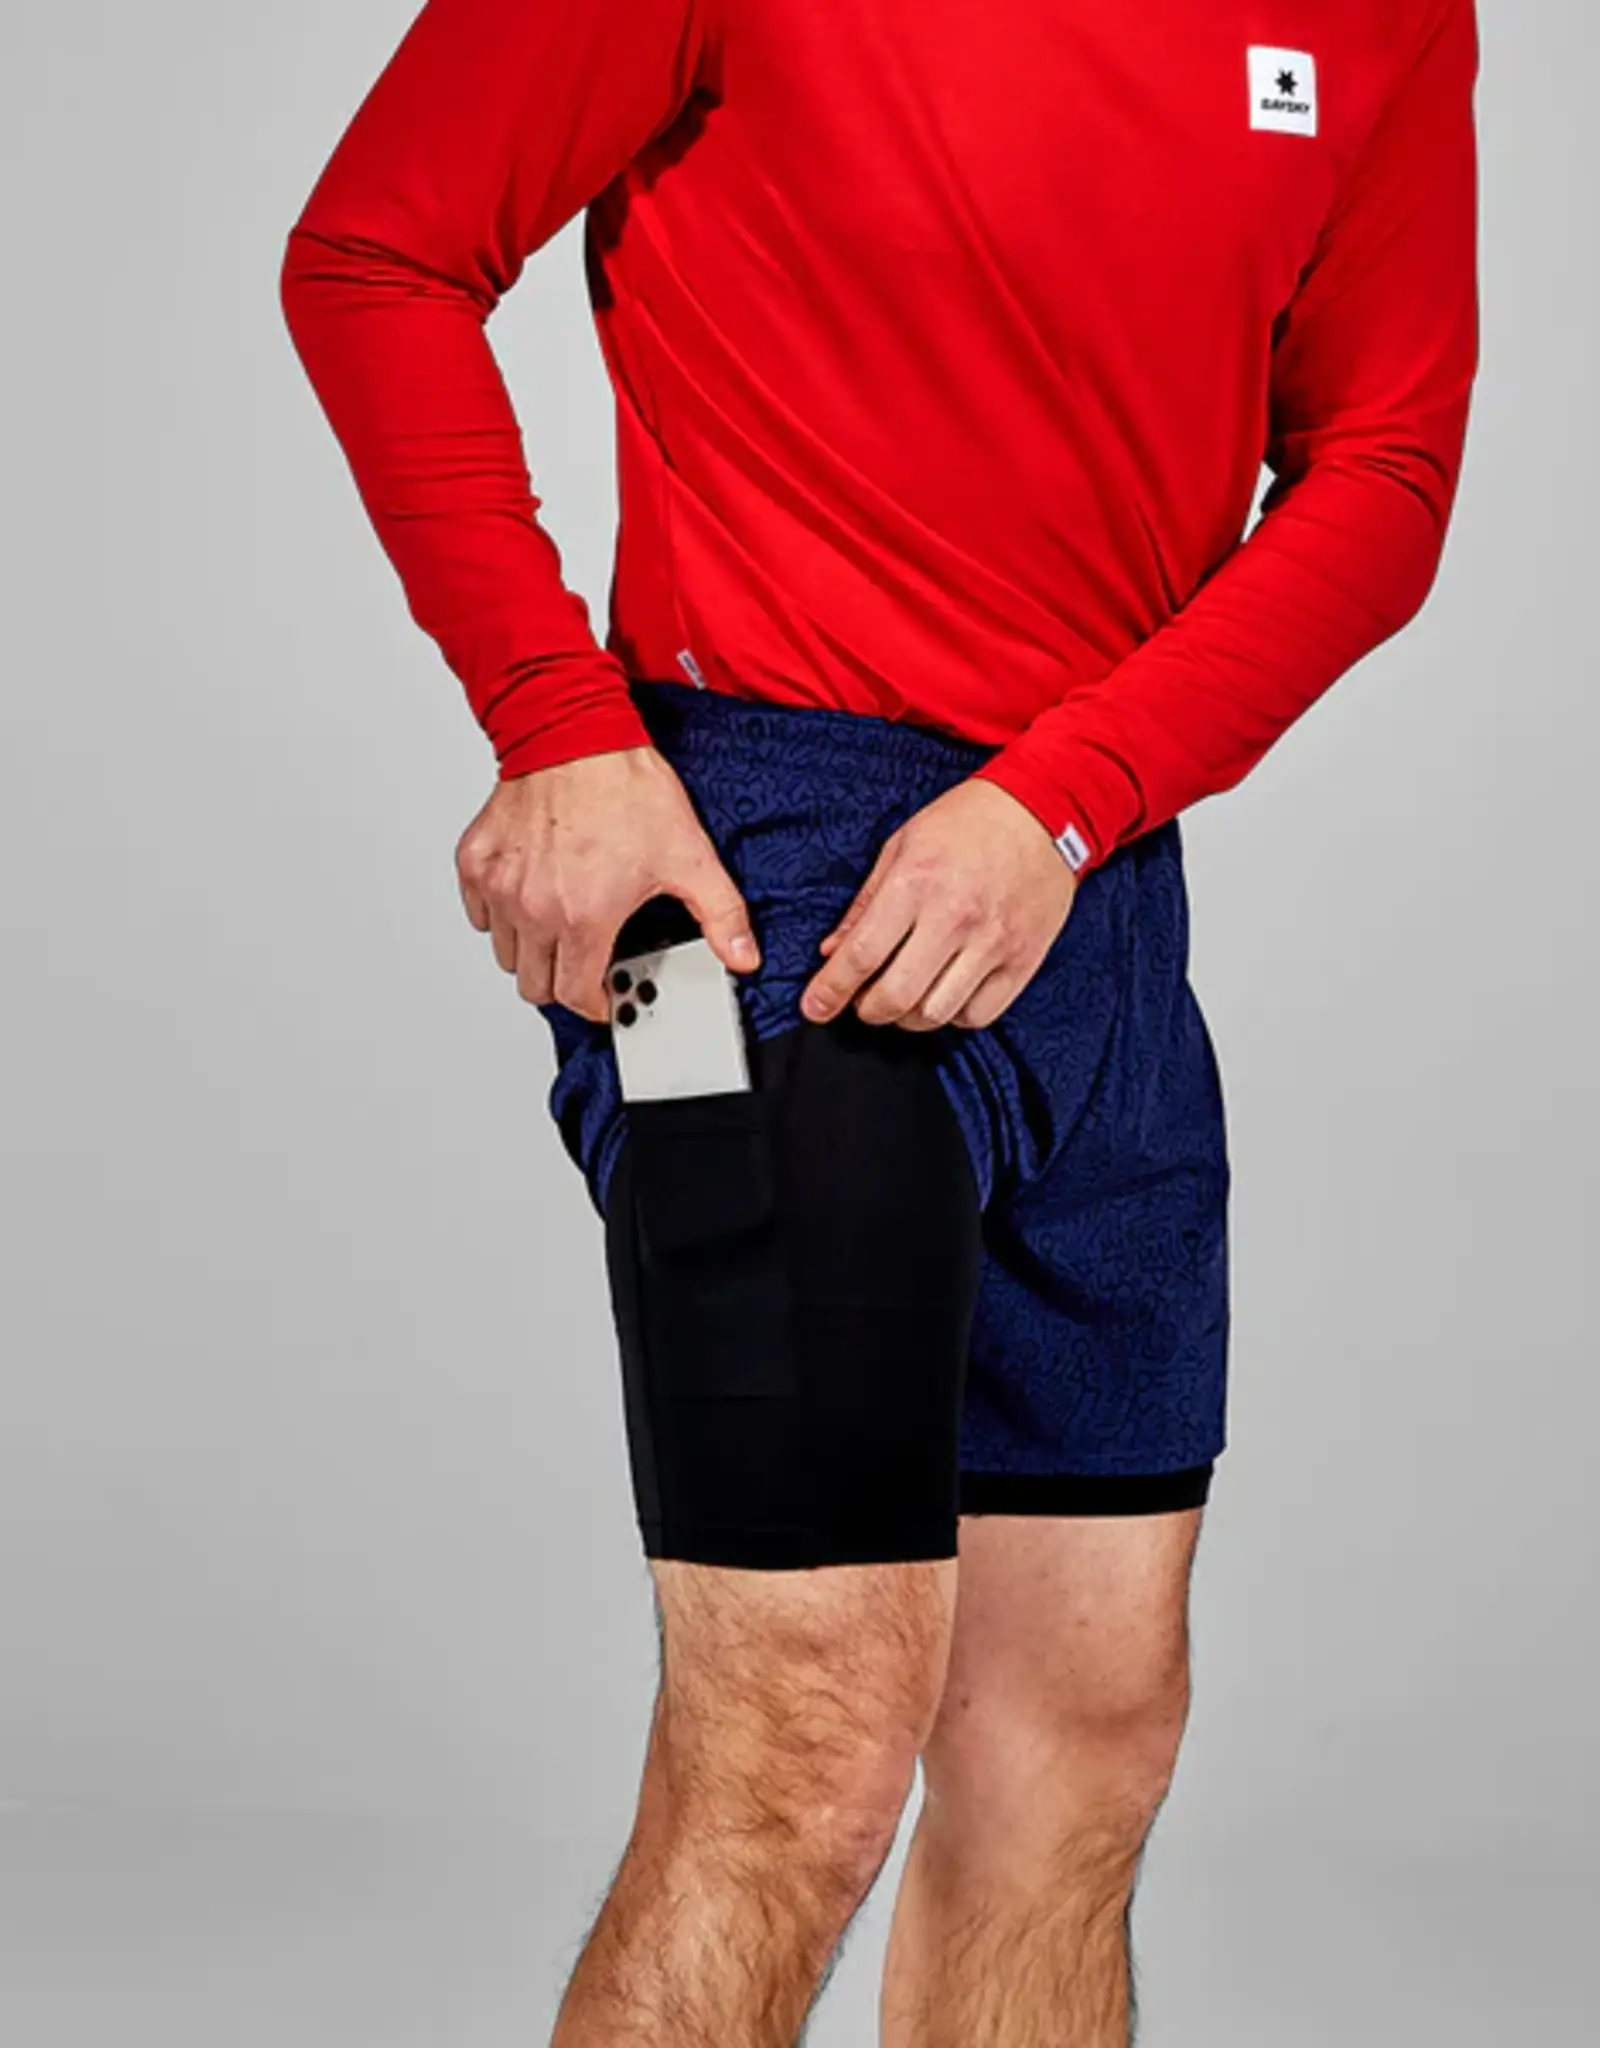 Saysky CC Pace 2 in 1 shorts 5"